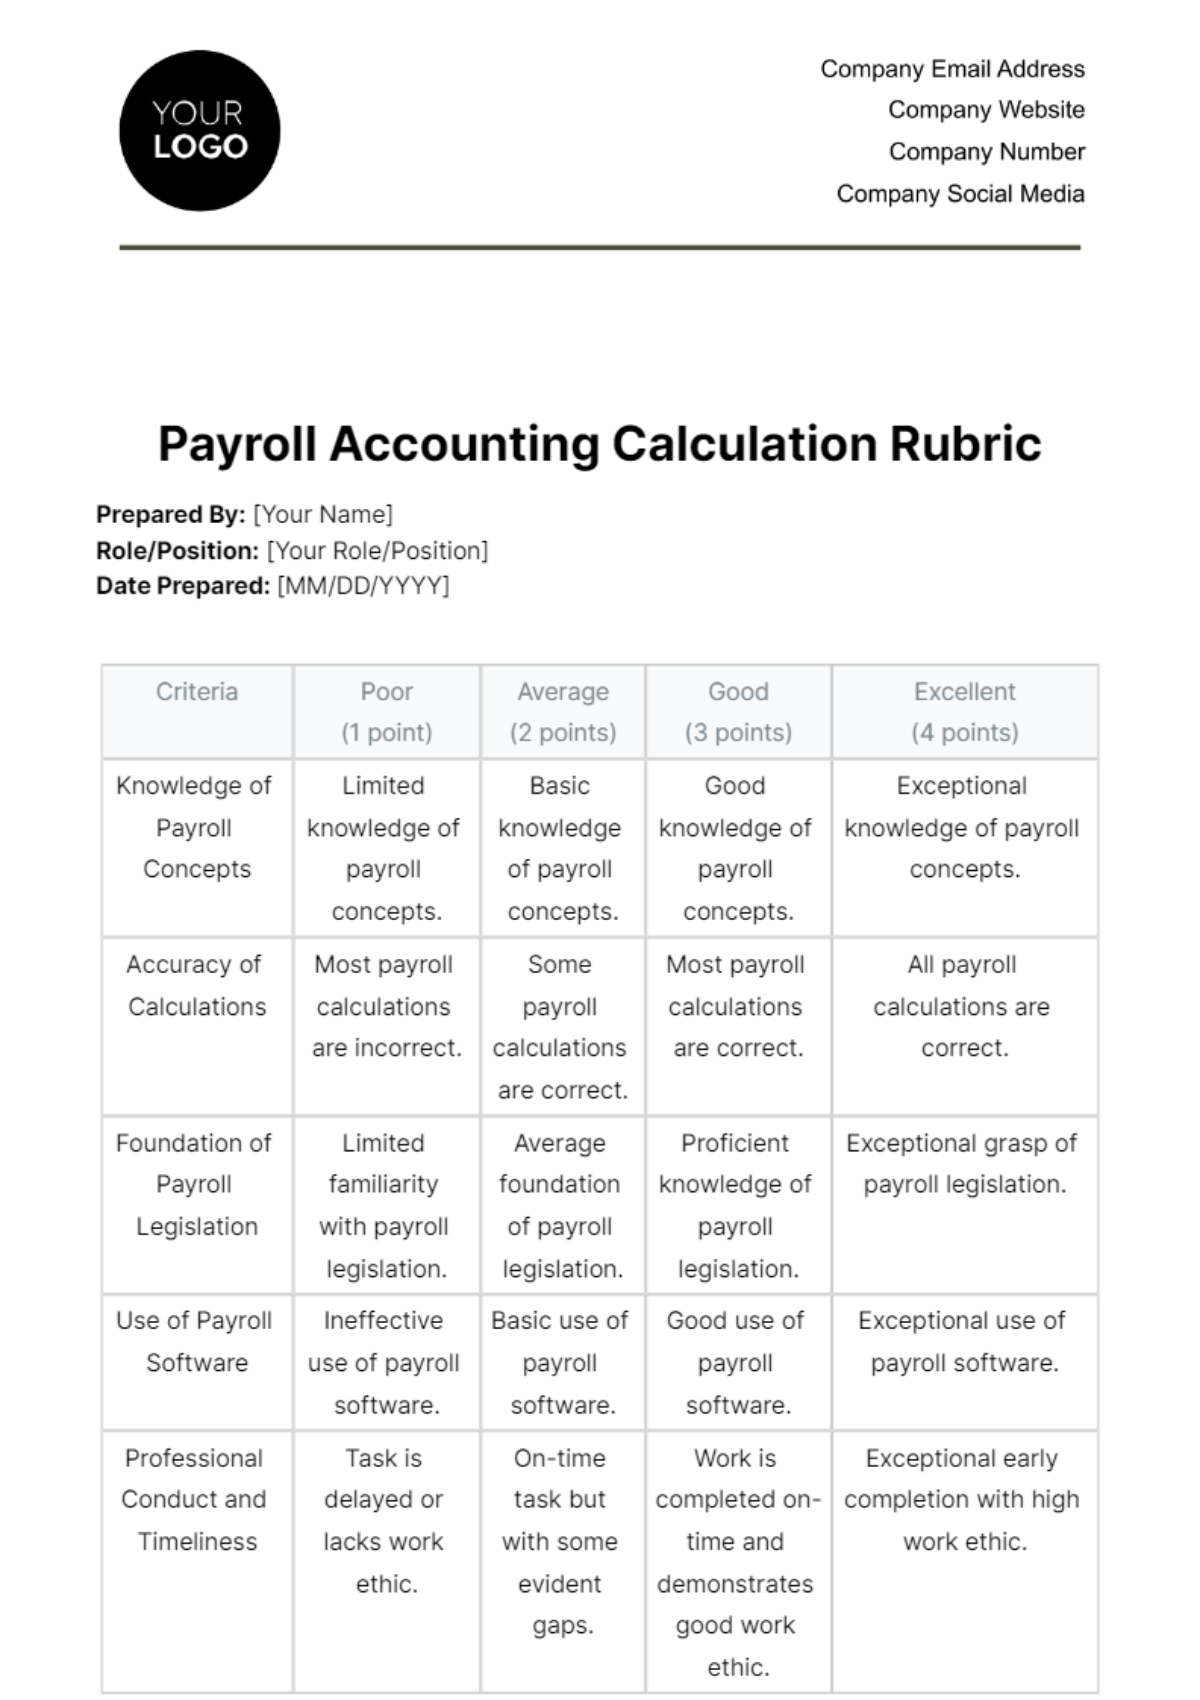 Payroll Accounting Calculation Rubric Template